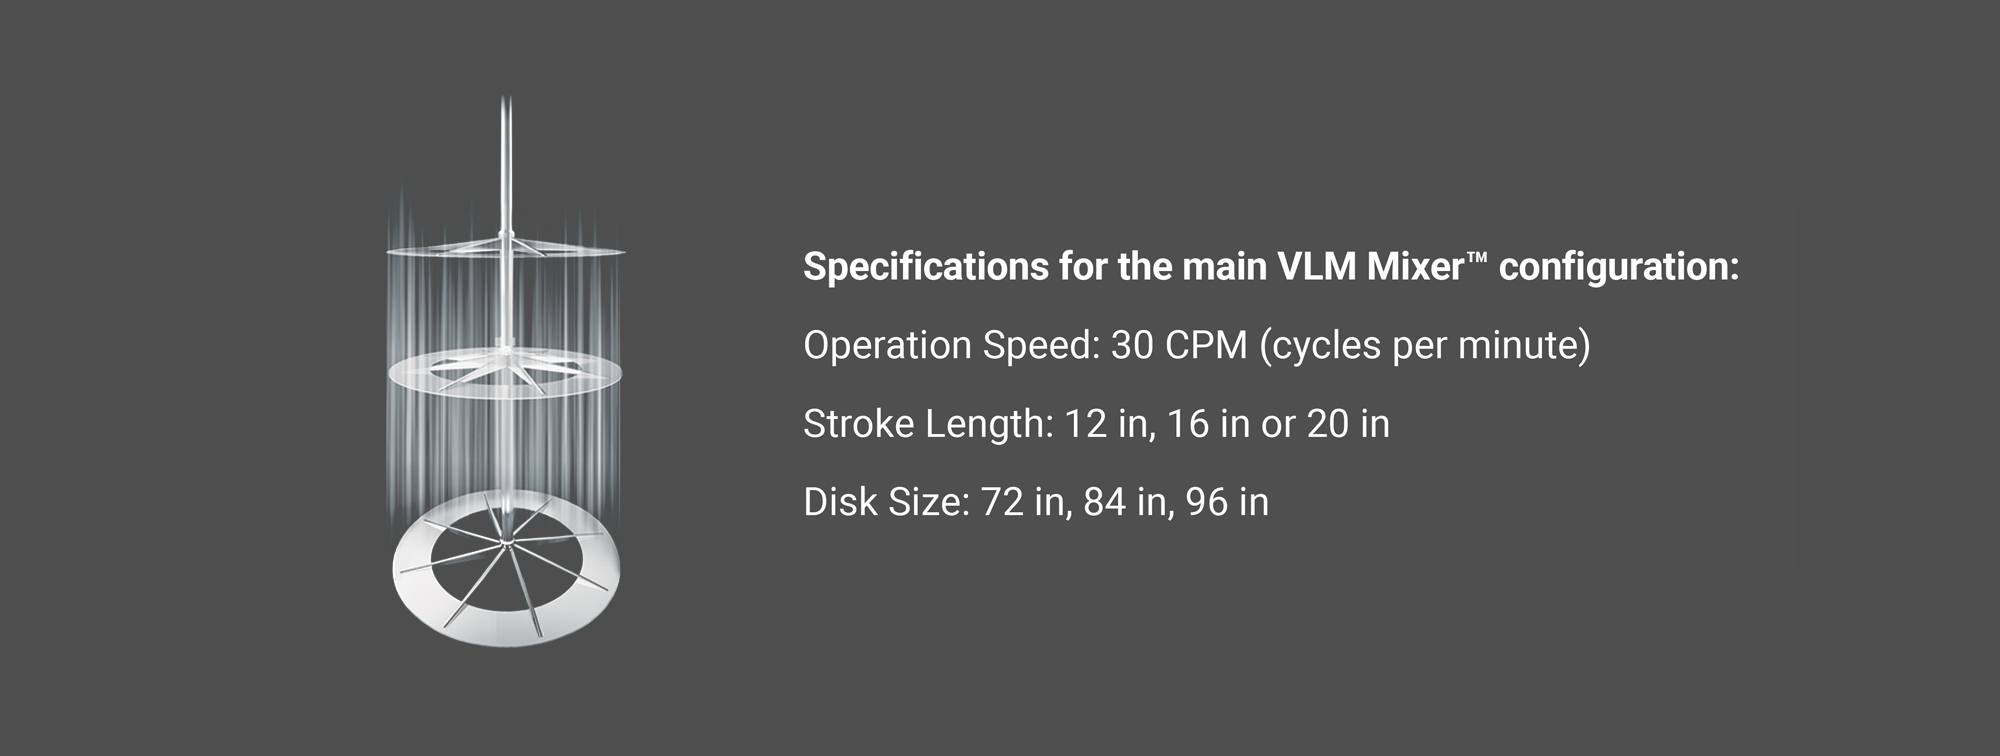 Specifications for the main VLM Mixer configuration